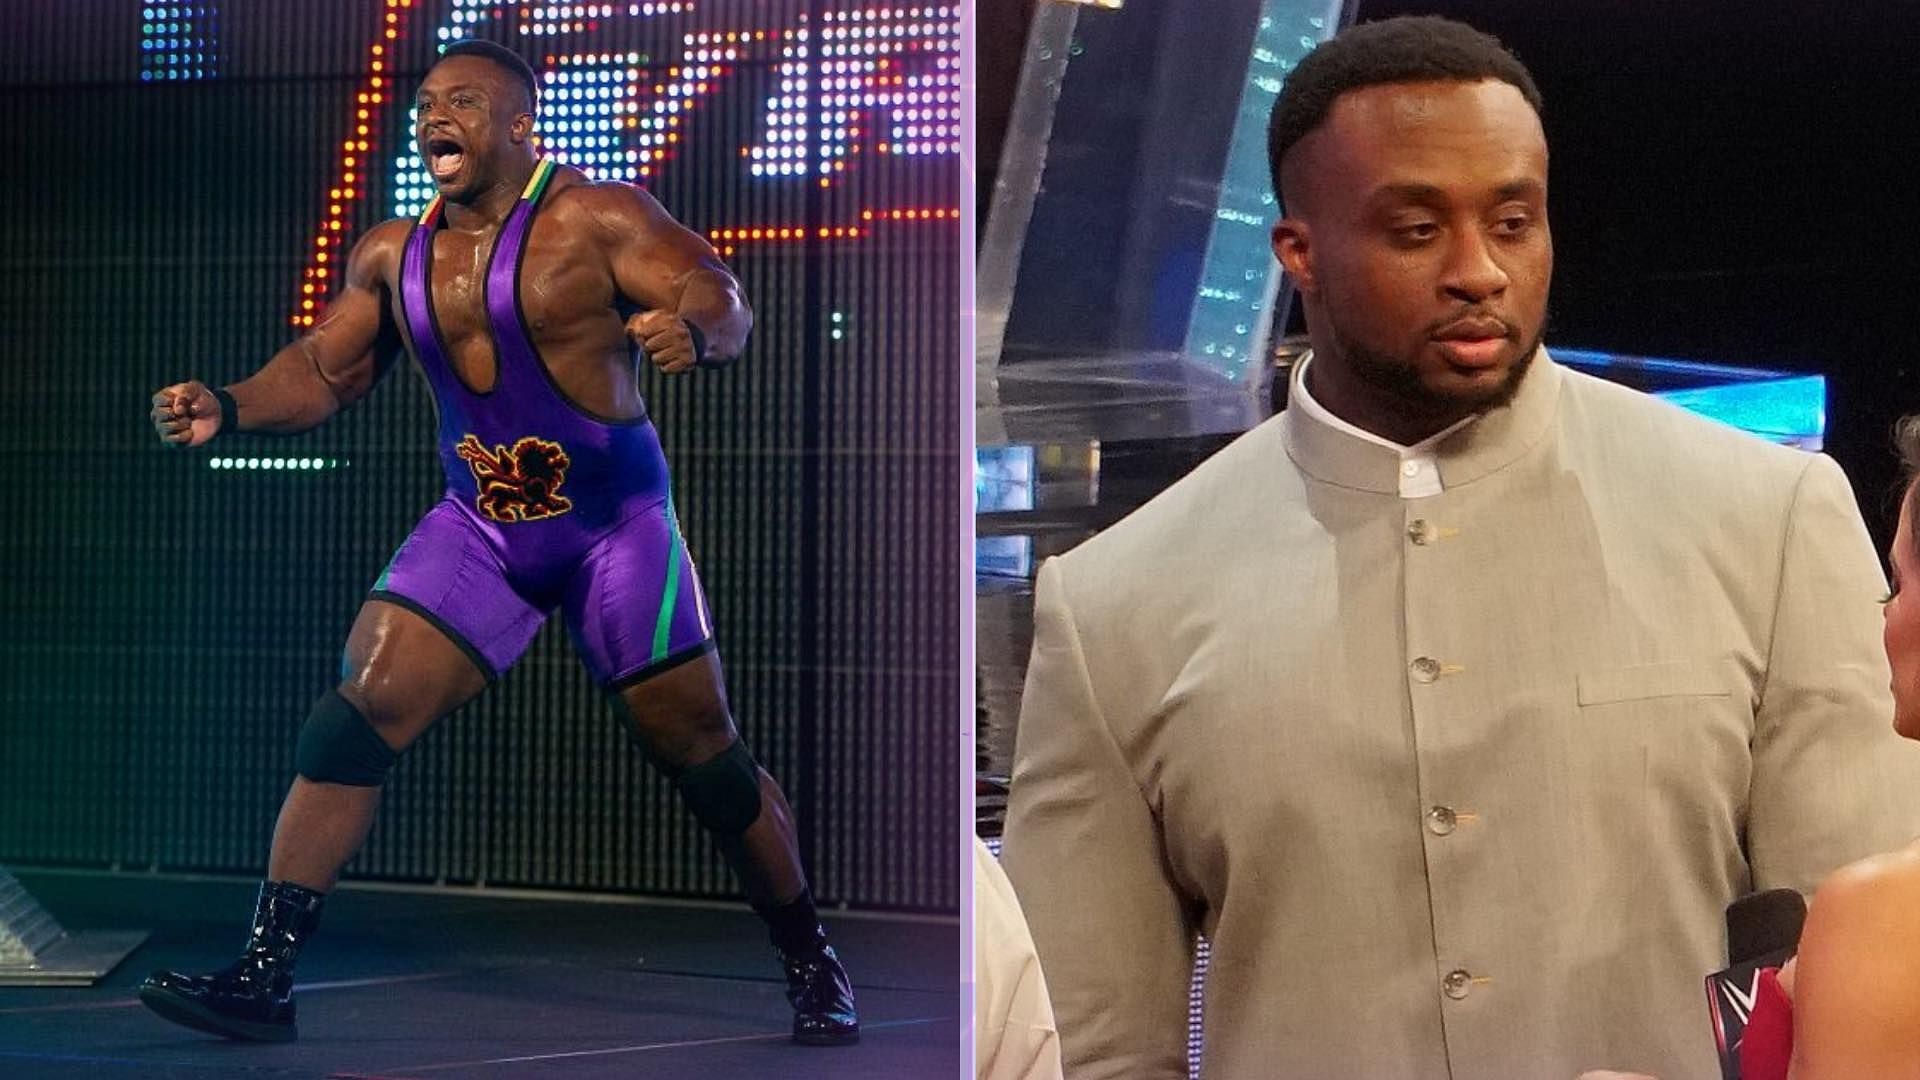 There are several possible roles for Big E in WWE